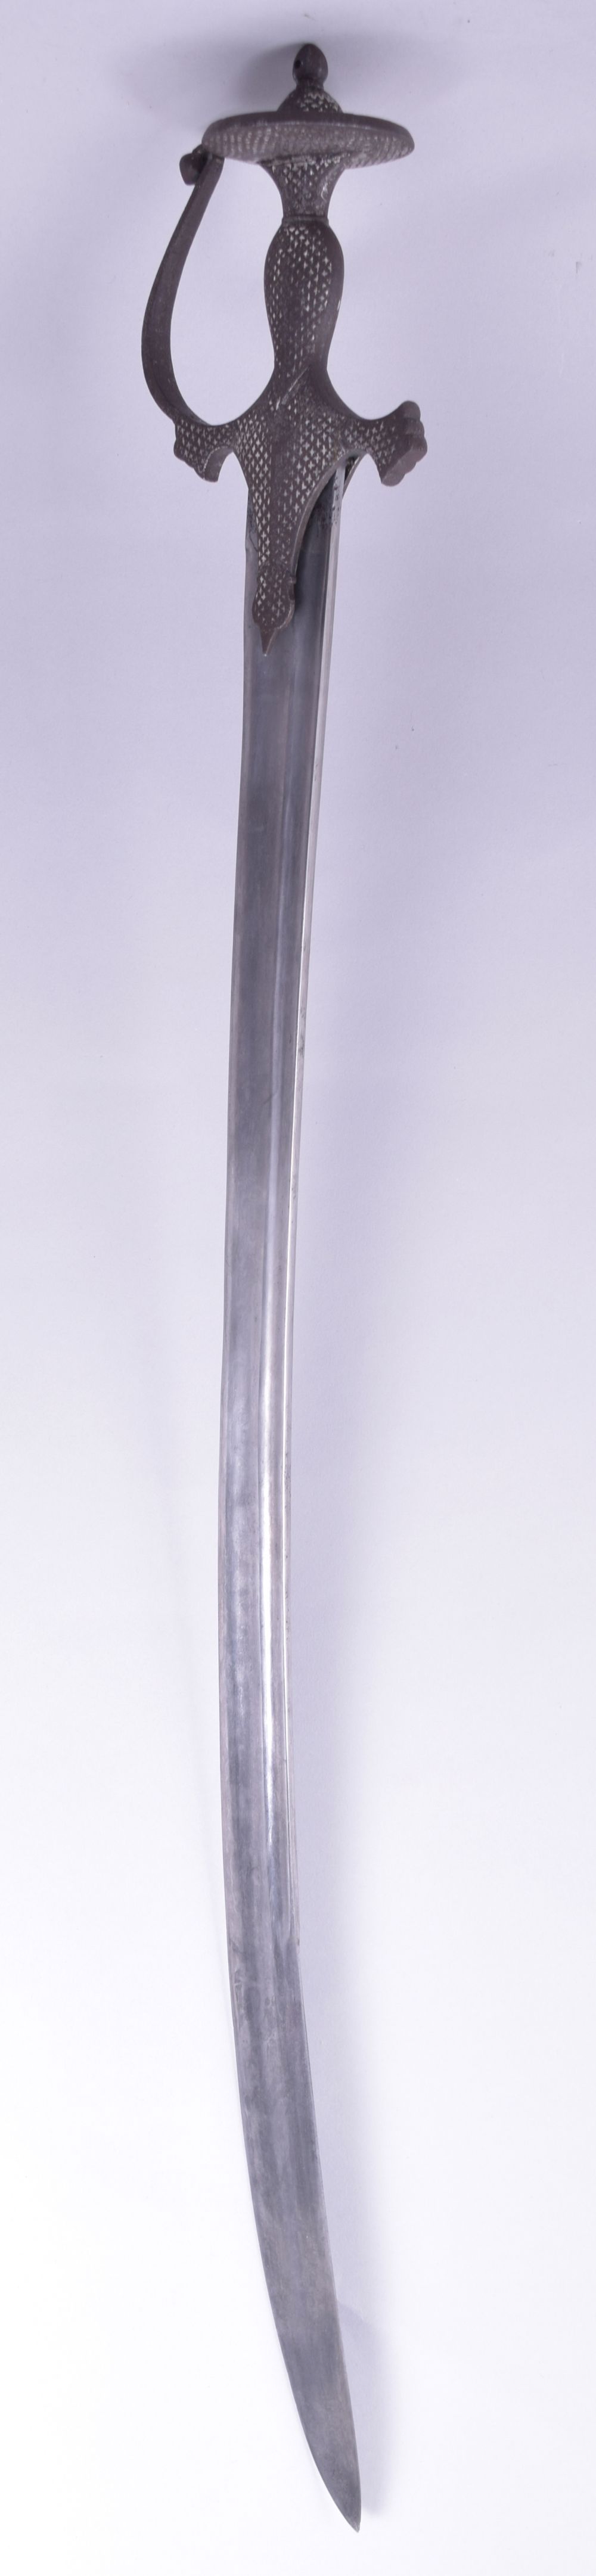 A FINE 18TH CENTURY INDIAN WATERED STEEL TULWAR SWORD, with silver inlaid handle, 88.5cm long.